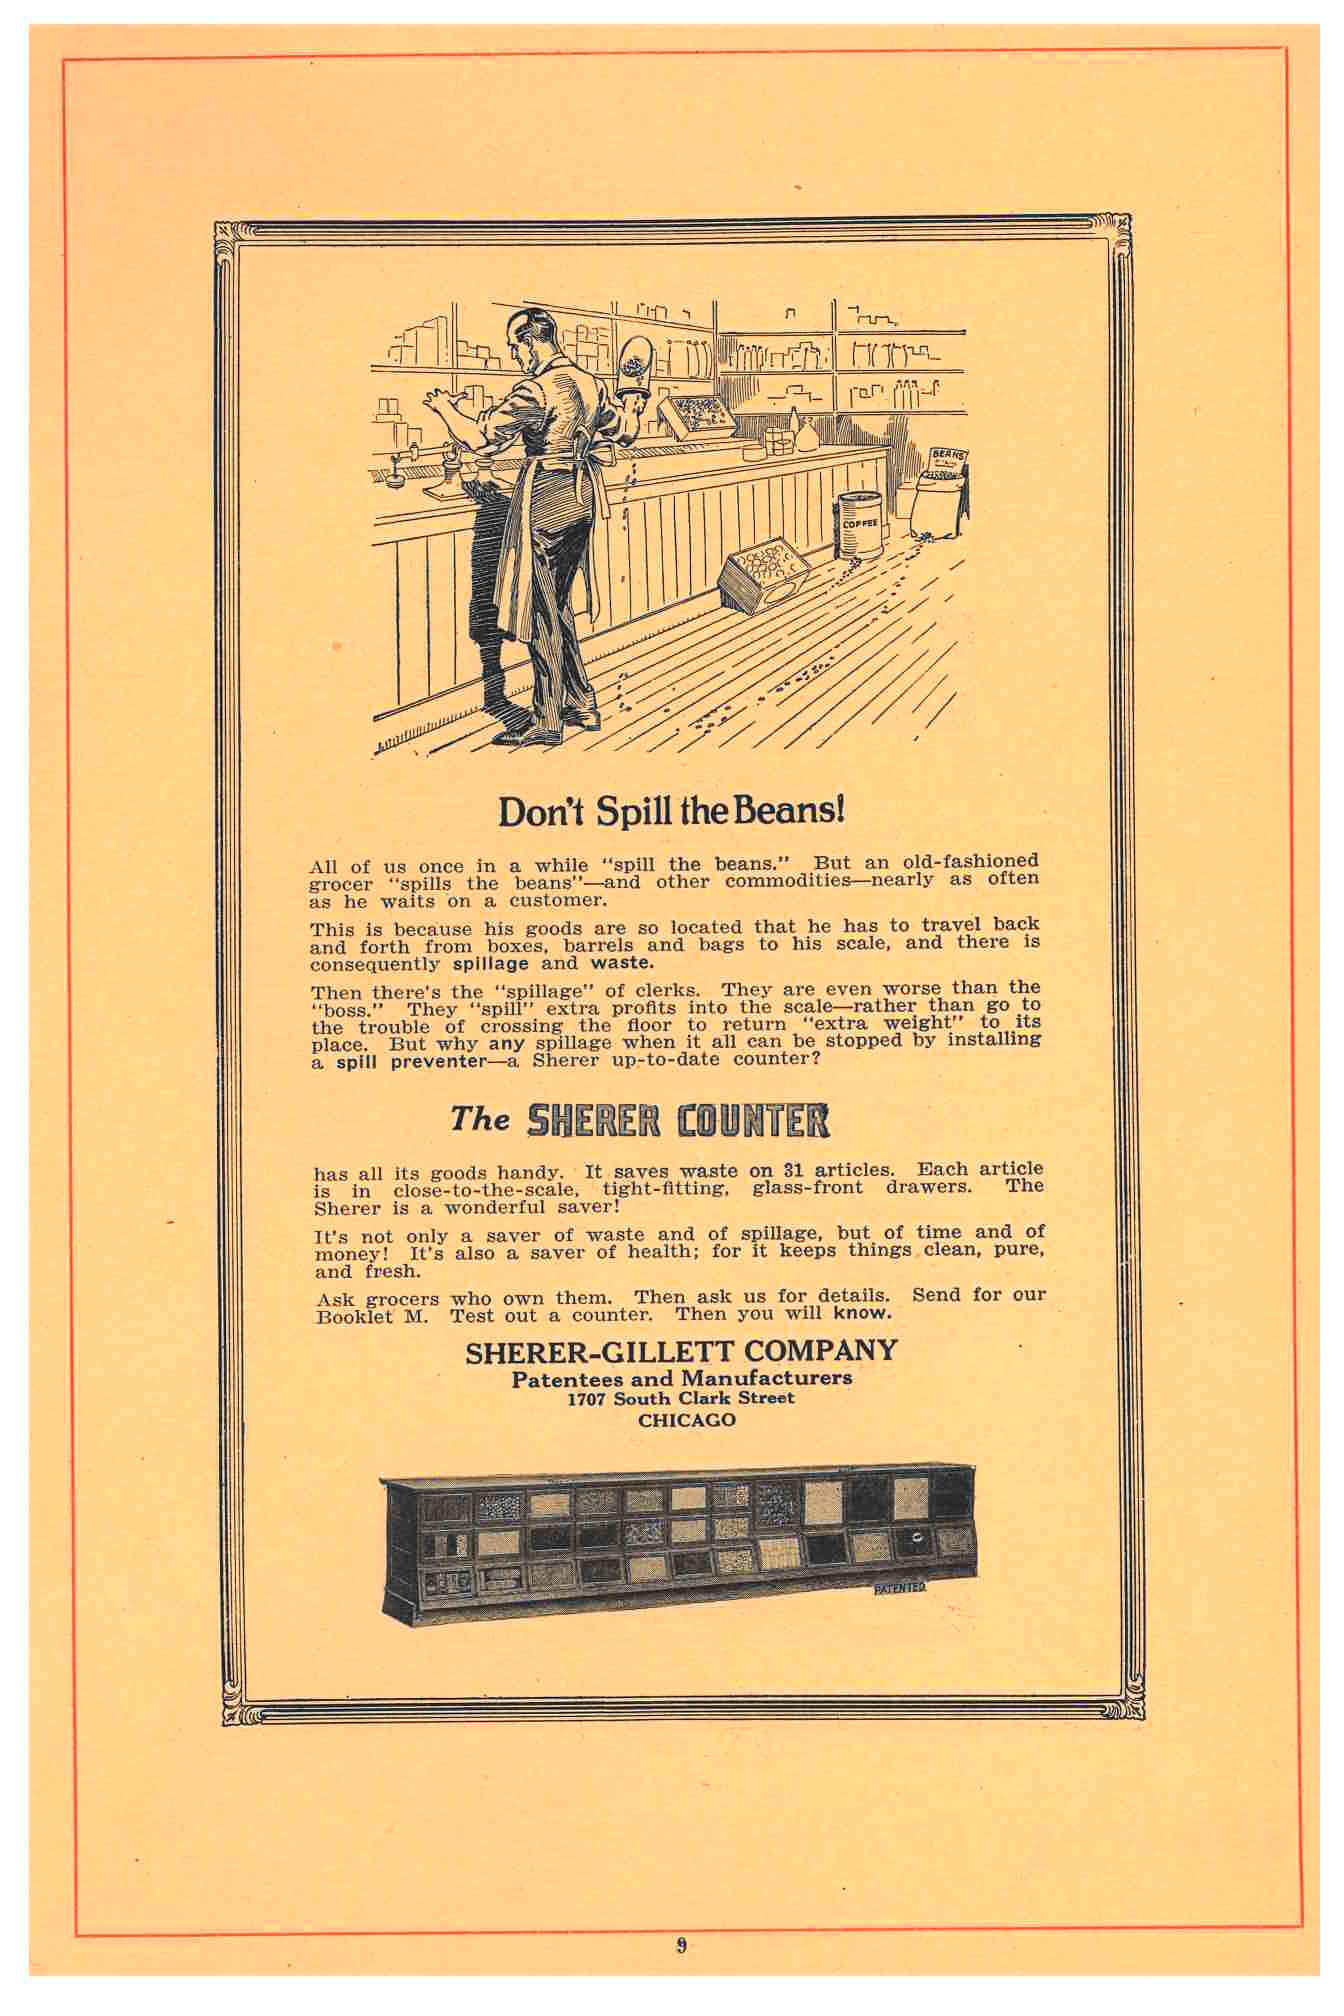 advertisement for Sherer Counter “Don’t Spill the Beans!” with image of Sherer Counter